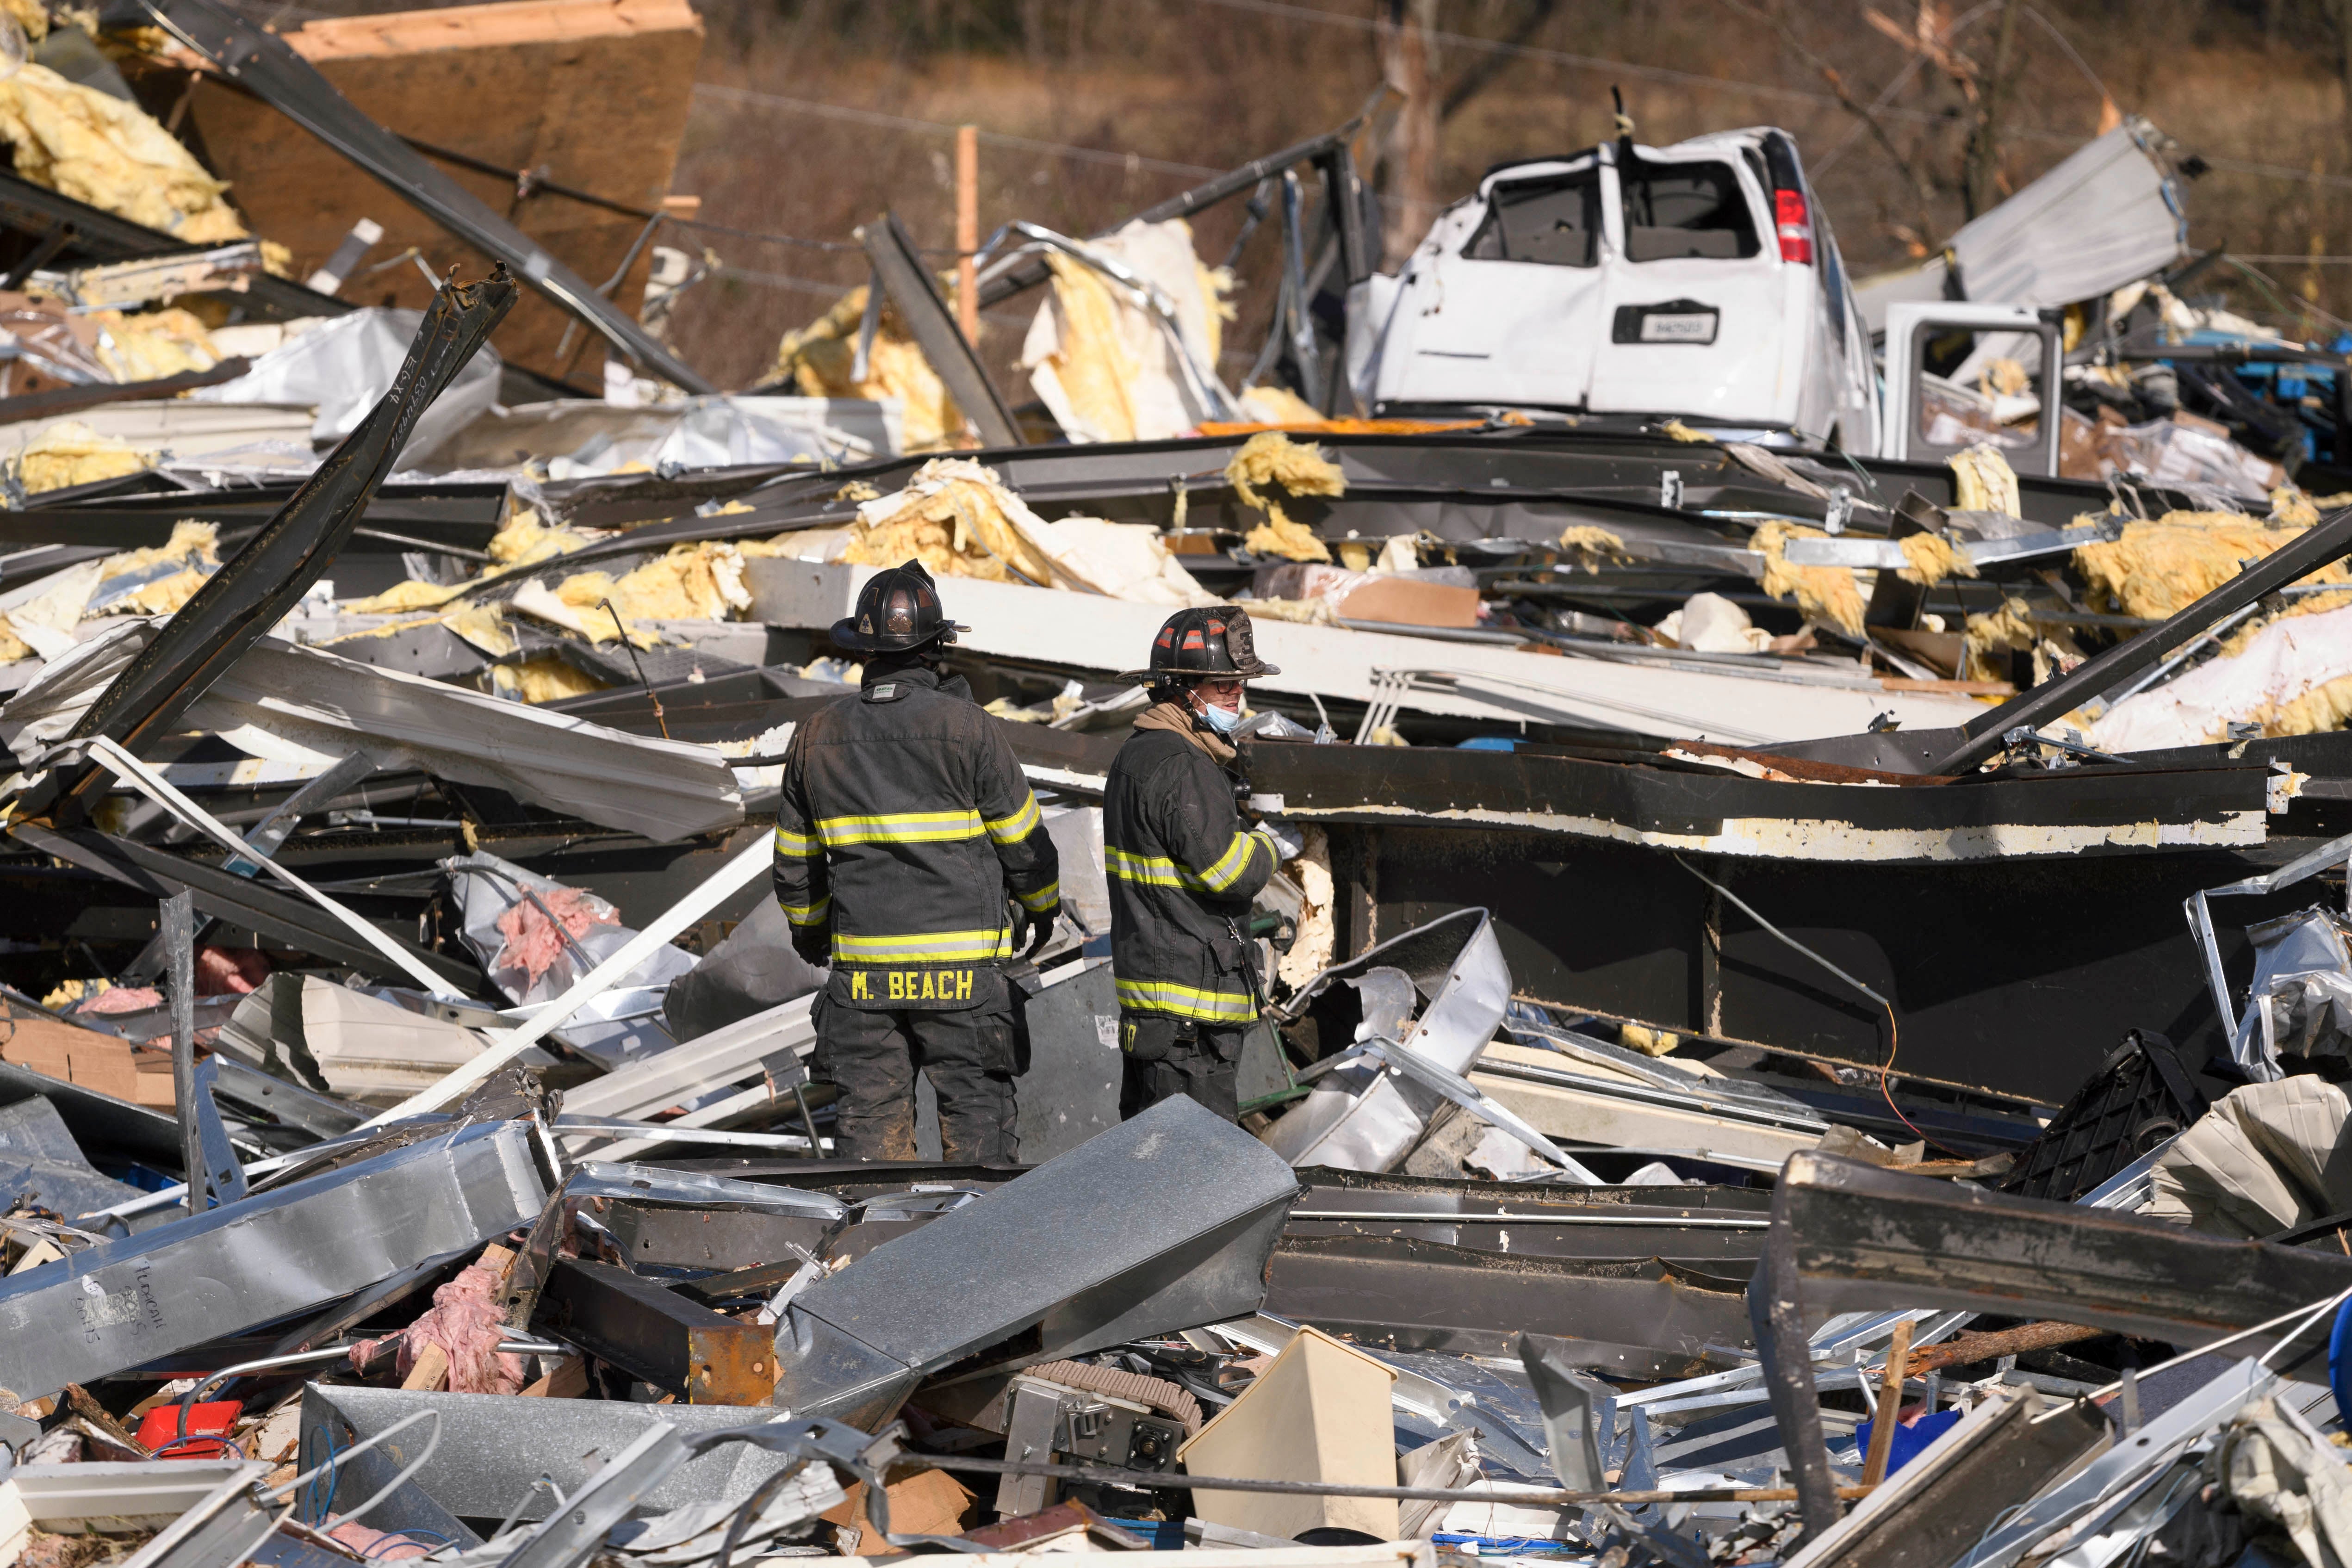 Emergency workers search through what is left of the Mayfield Consumer Products Candle Factory after it was destroyed by a tornado in Mayfield, Kentucky, on December 11, 2021.